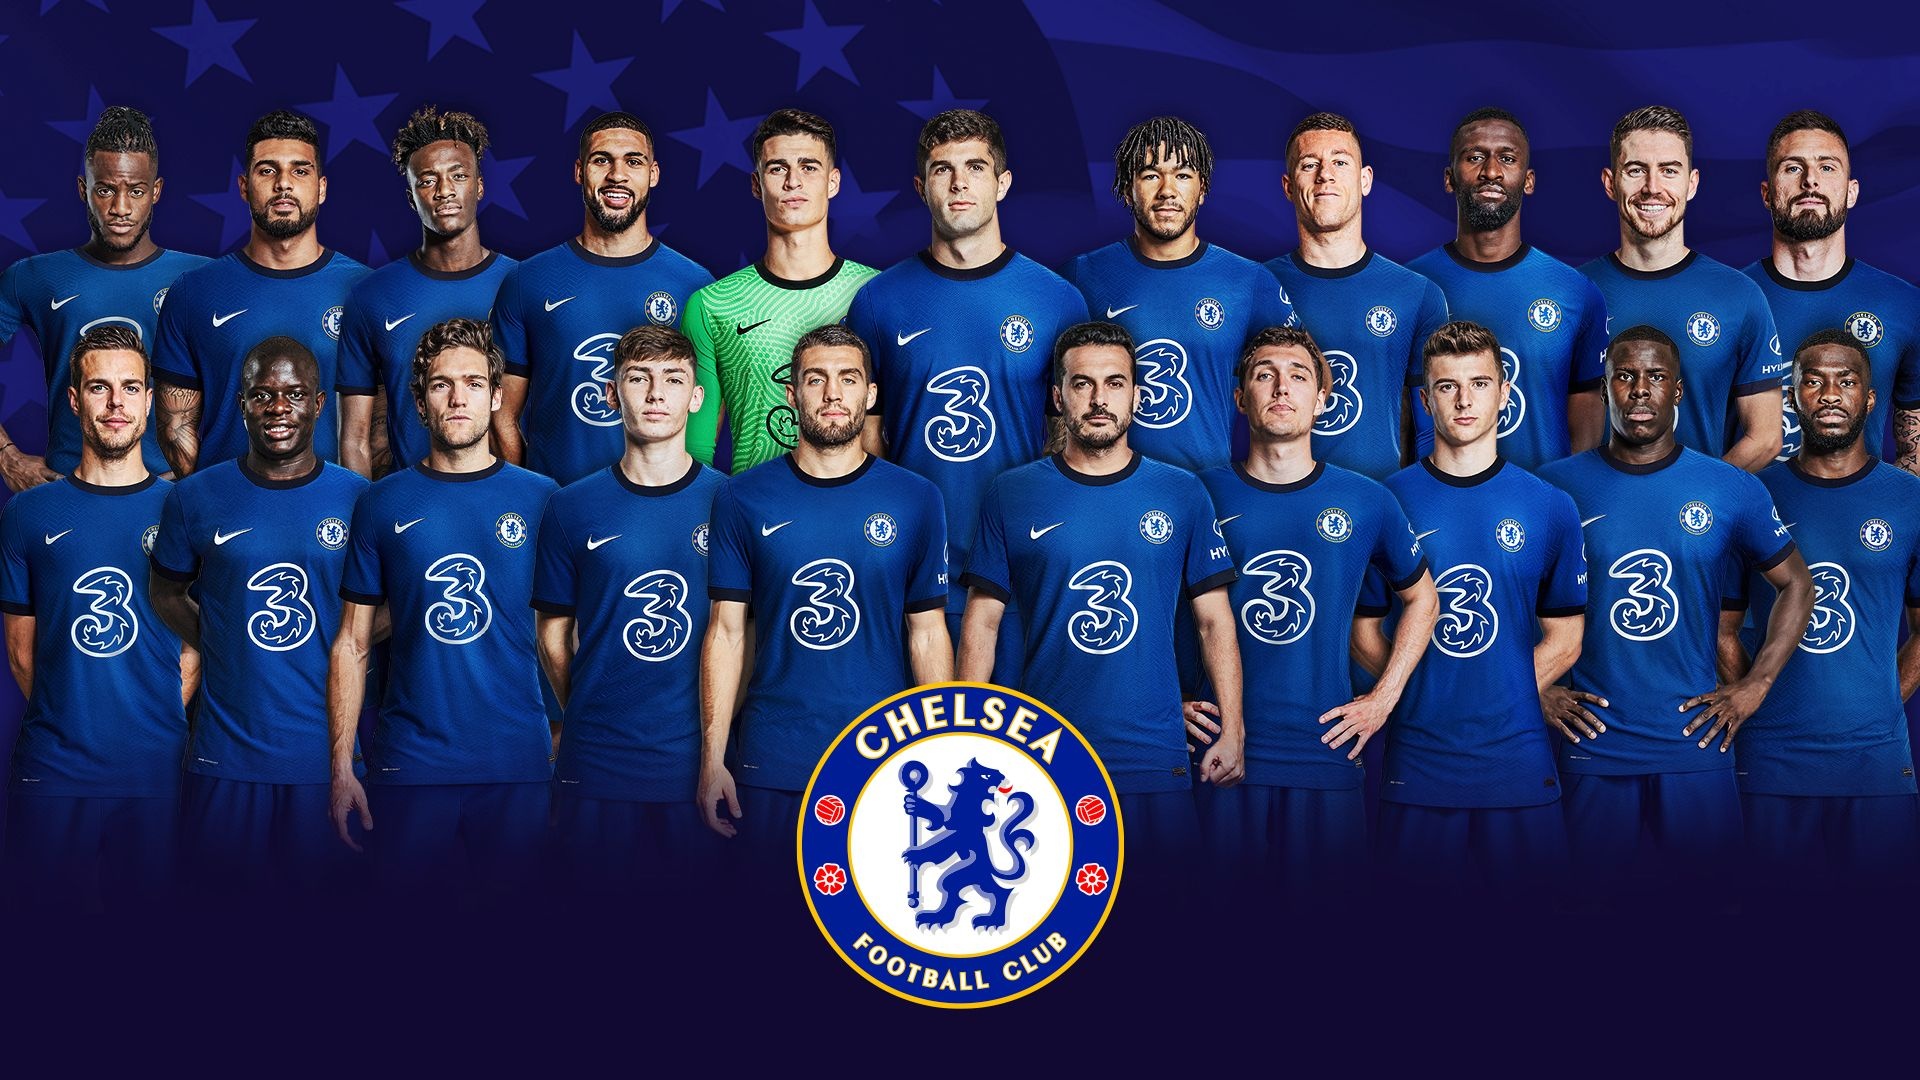 Chelsea: Known for winning the UEFA Champions League for a second time in 2021 with a 1-0 victory over Manchester City in Porto. 1920x1080 Full HD Wallpaper.